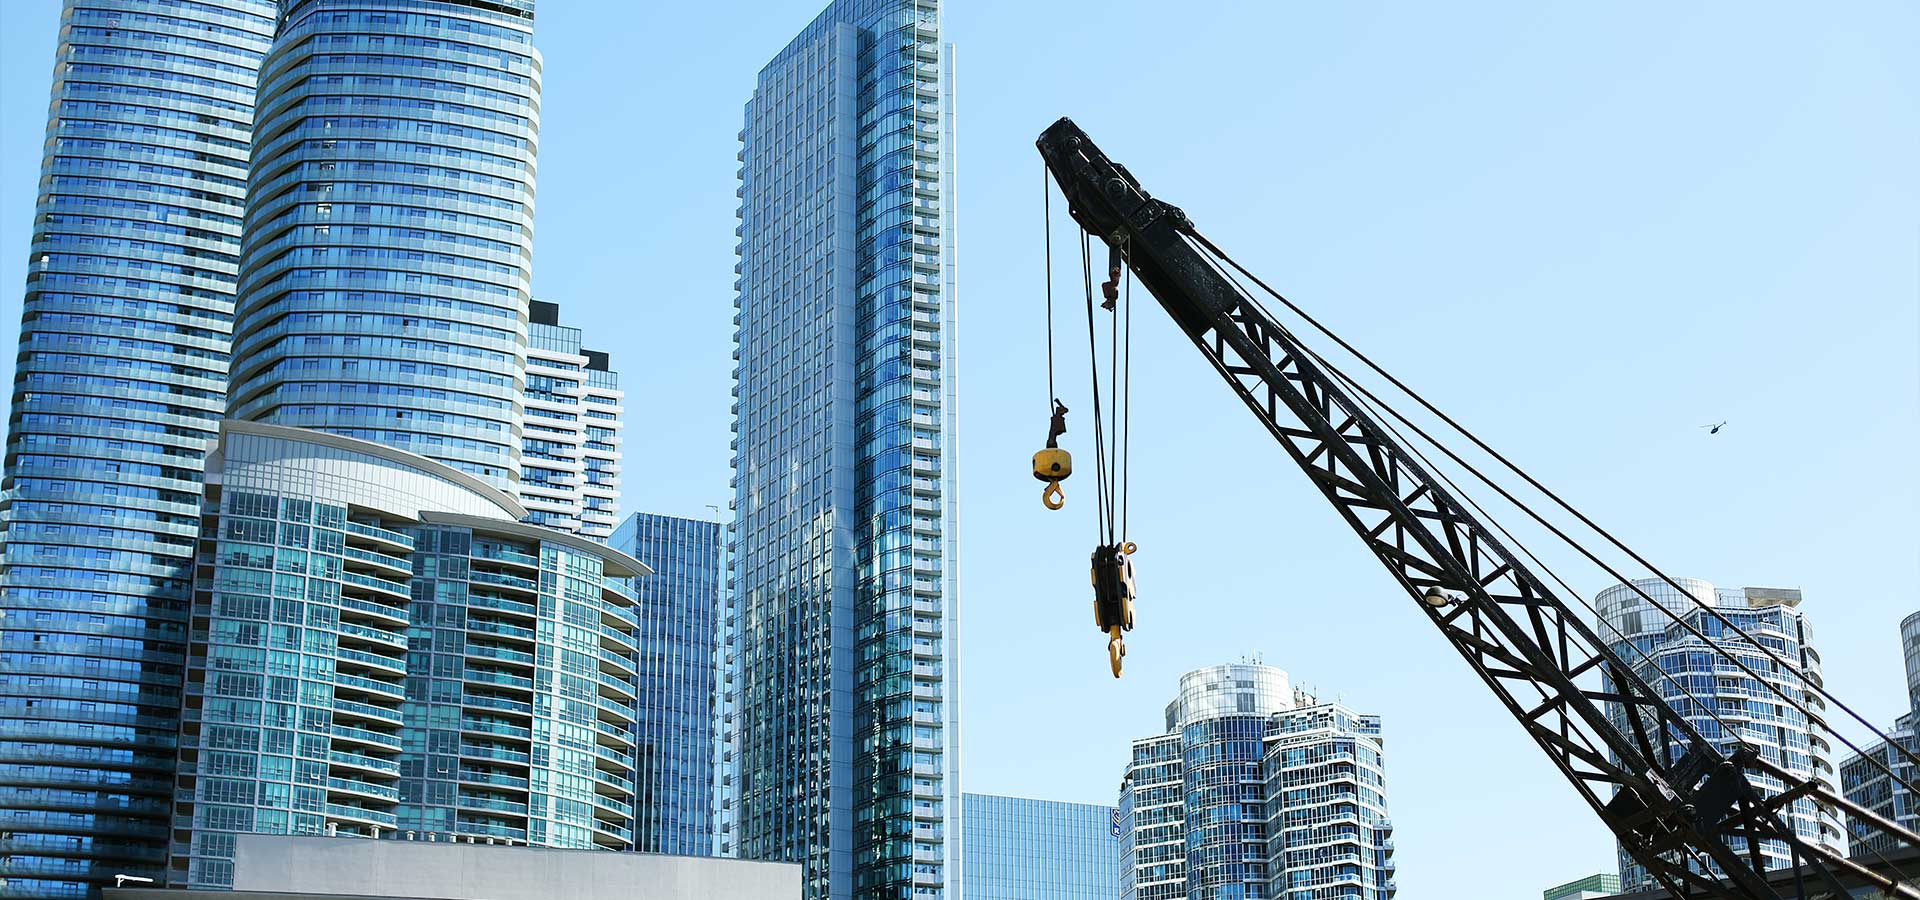 The Booming Construction Industry in Ontario